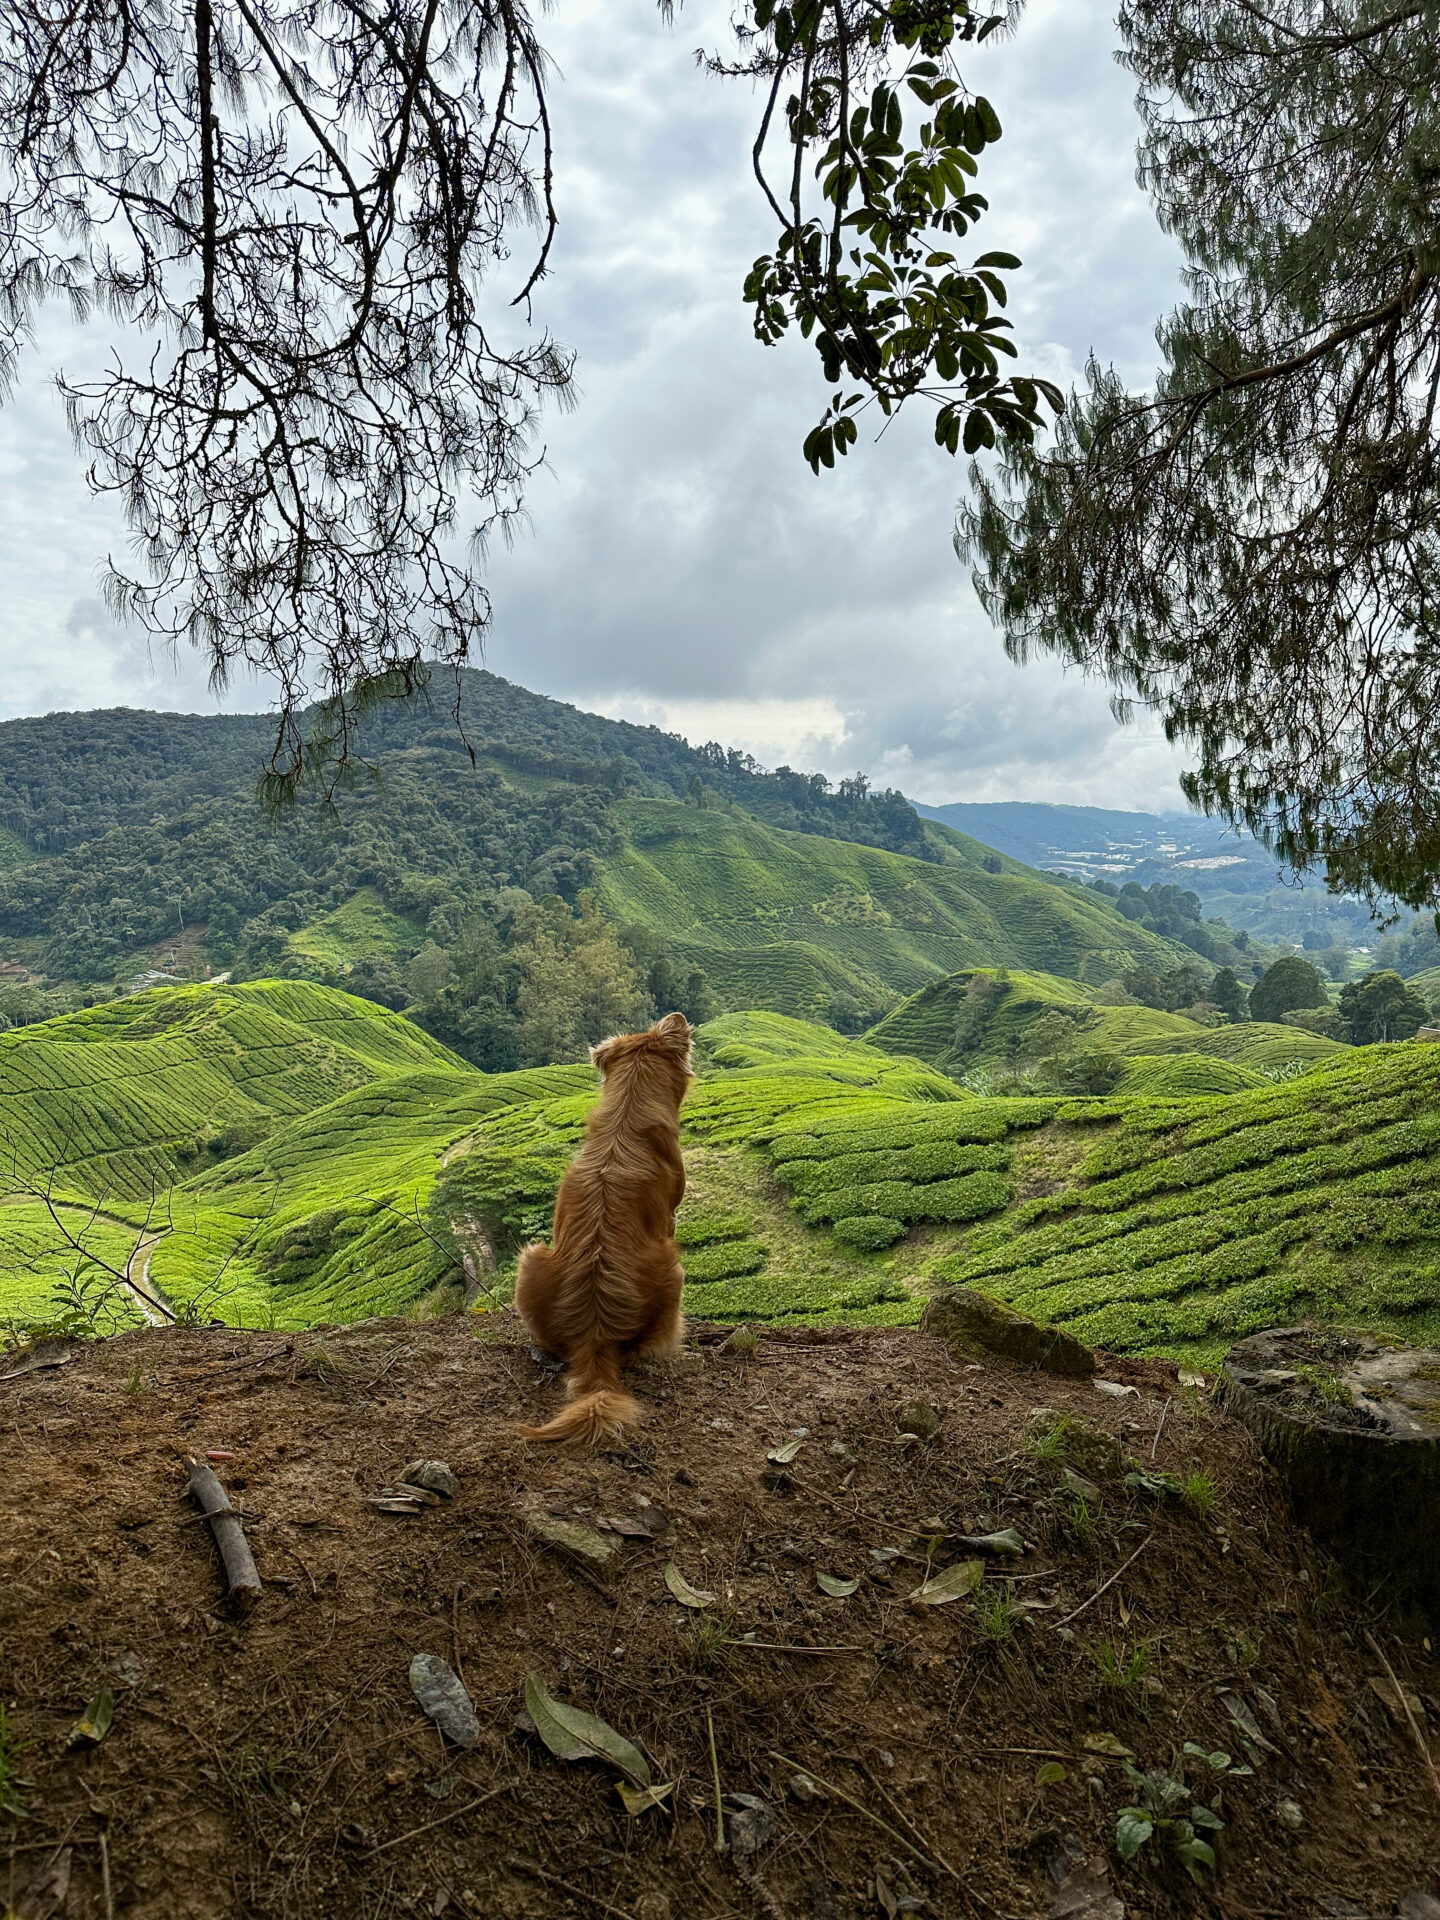 The Cameron Highlands is one of the best places to visit in Malaysia